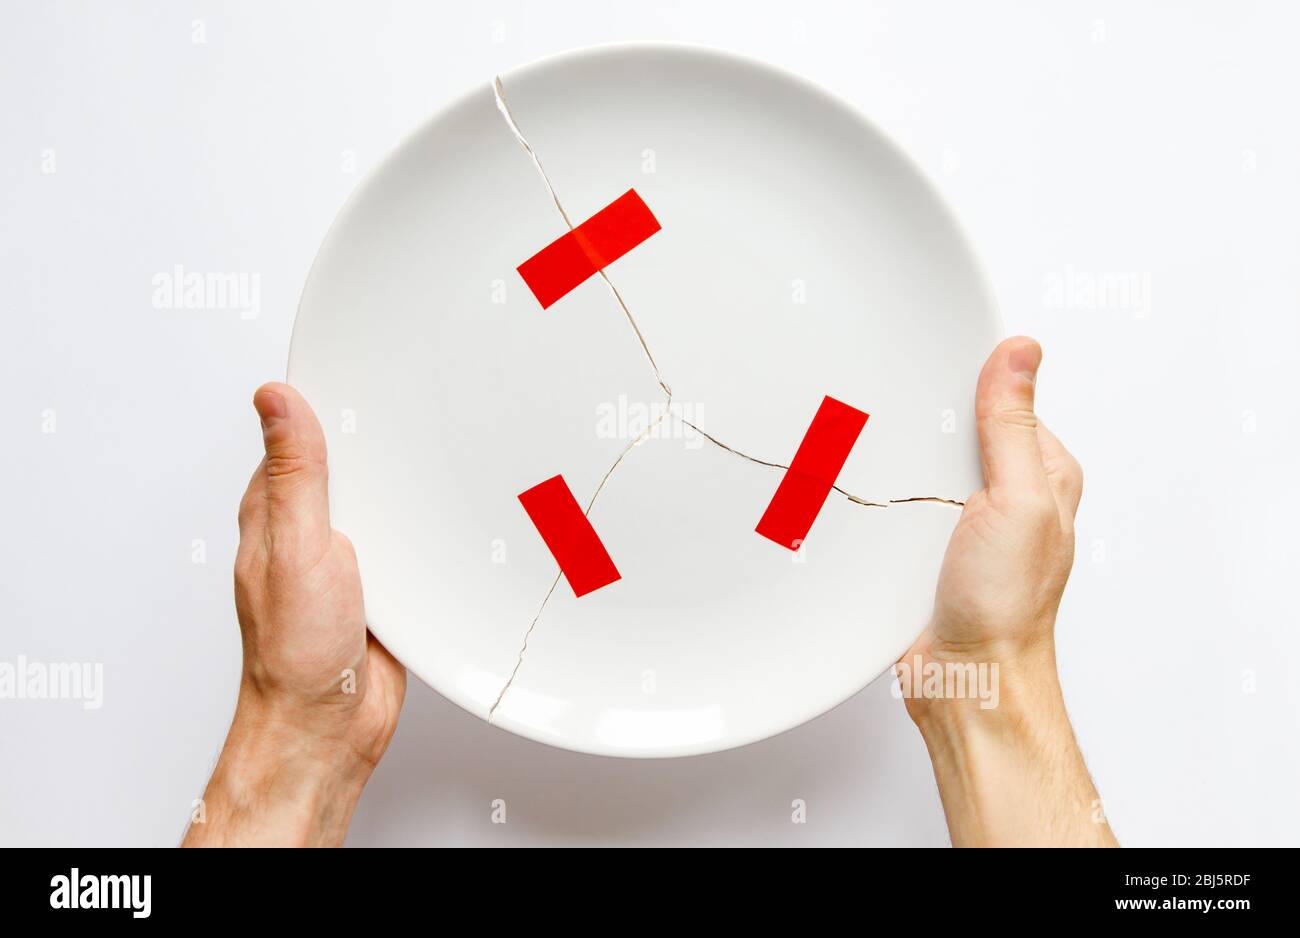 Top view of man hands holding a broken white plate, parts glued with red tape. Metaphor for divorce, relationships, friendships, crack in marriage. Lo Stock Photo